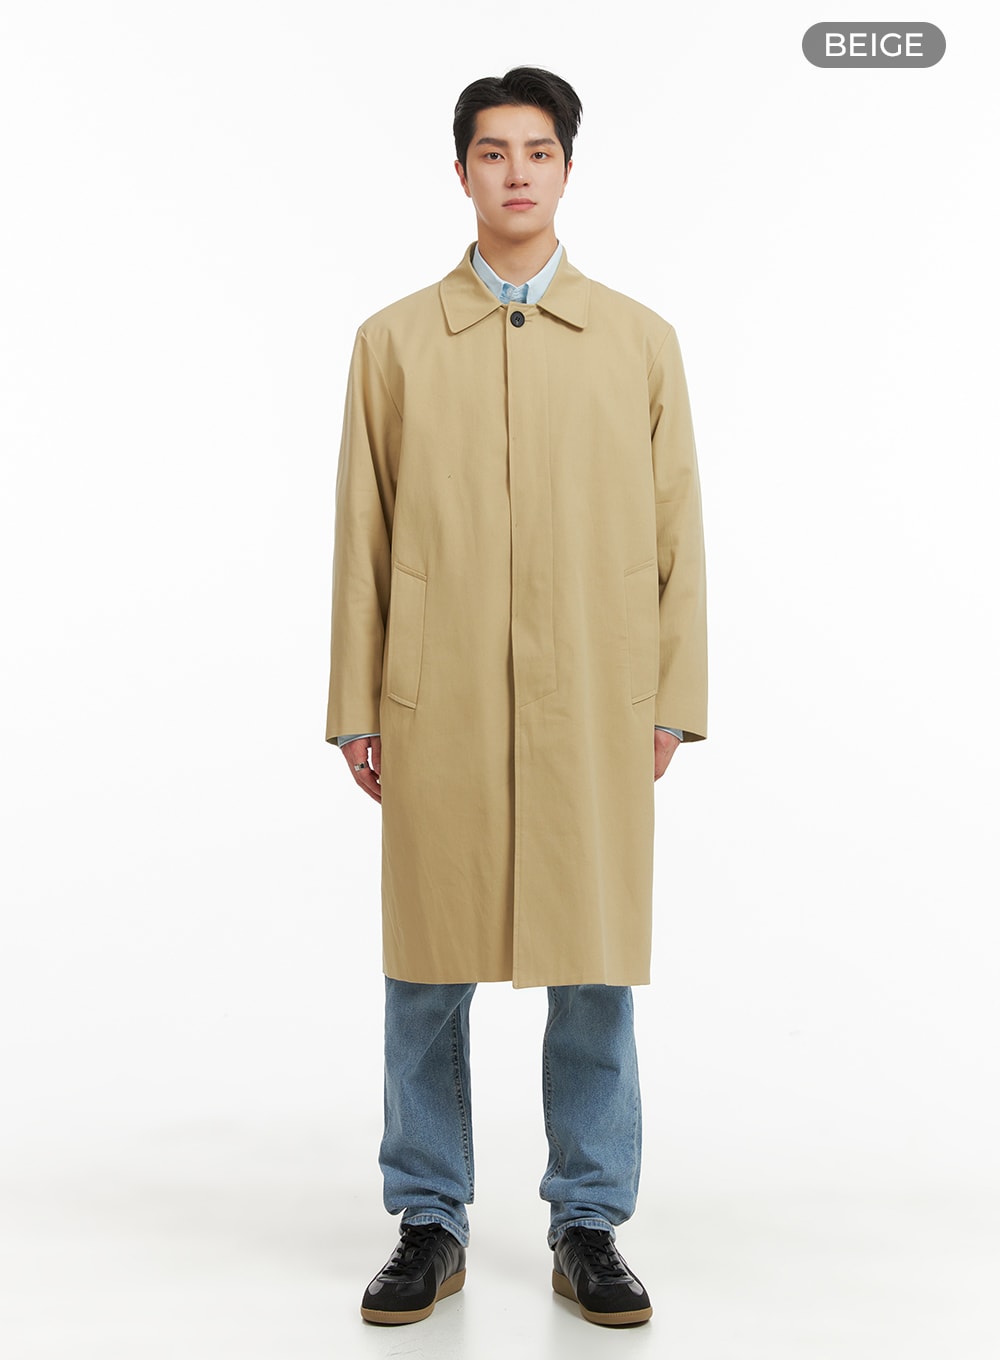 mens-solid-cotton-trench-coat-ia401 / Beige